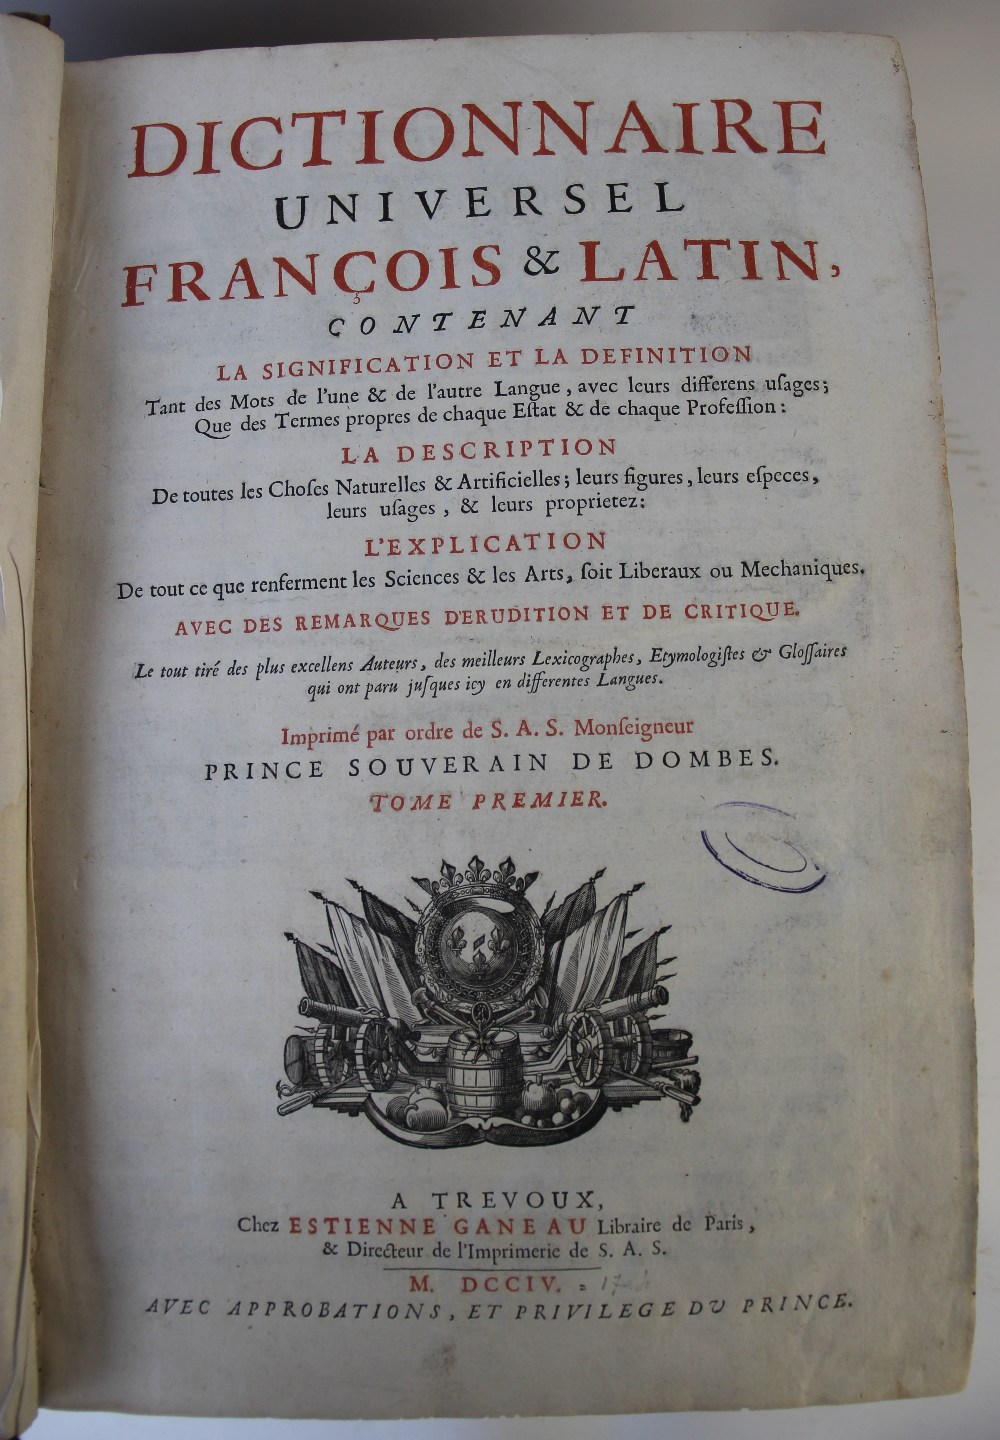 DICTIONAIRE UNIVERSEL FRANCOIS & LATIN, an early 18th century French to Latin Dictionary, 3 vols, - Image 2 of 3